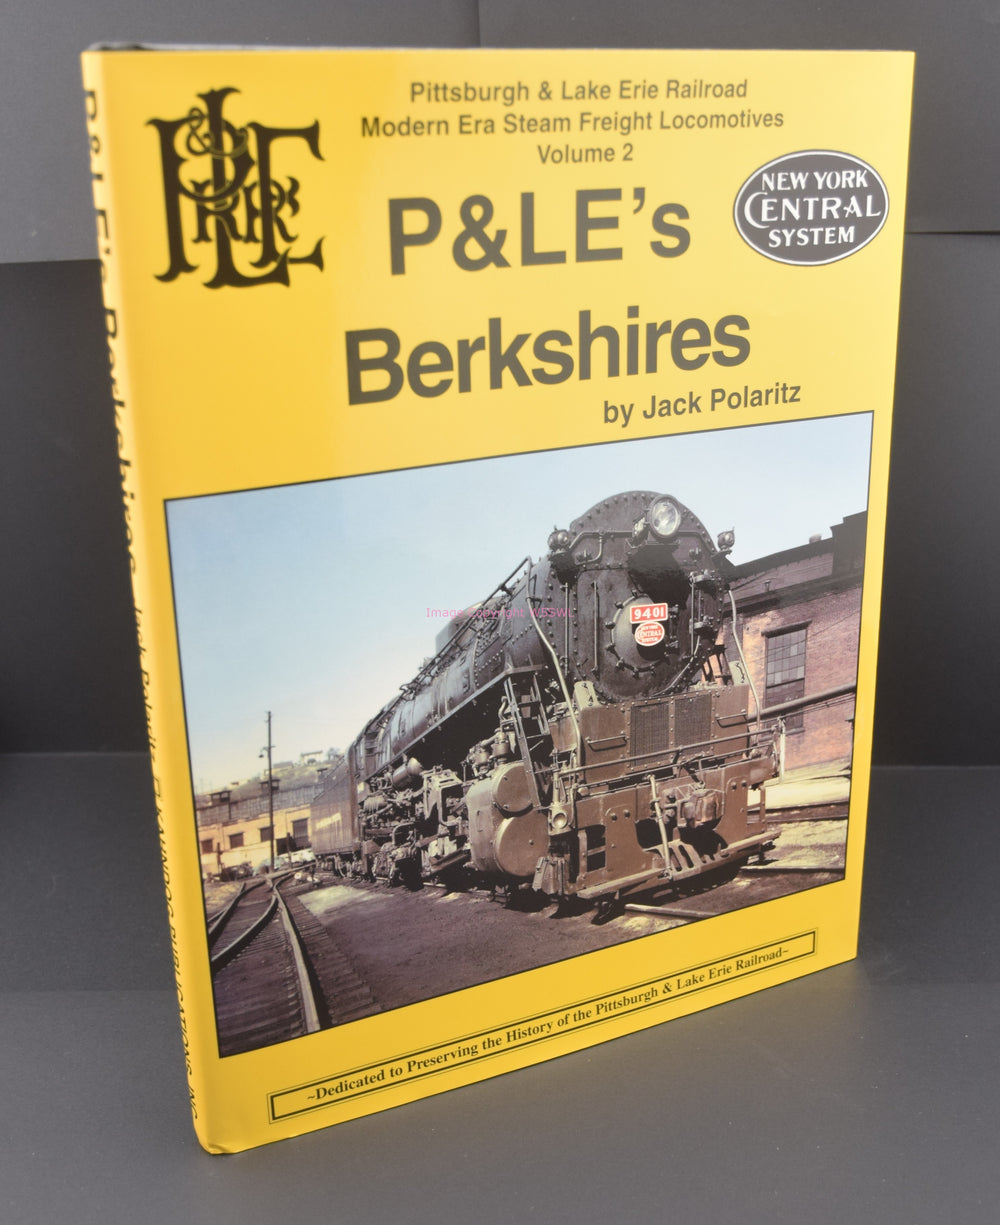 Pittsburgh & Lake Erie Modern Era Steam Vol 2 P&LE's Berkshires by Polaritz - Dave's Hobby Shop by W5SWL